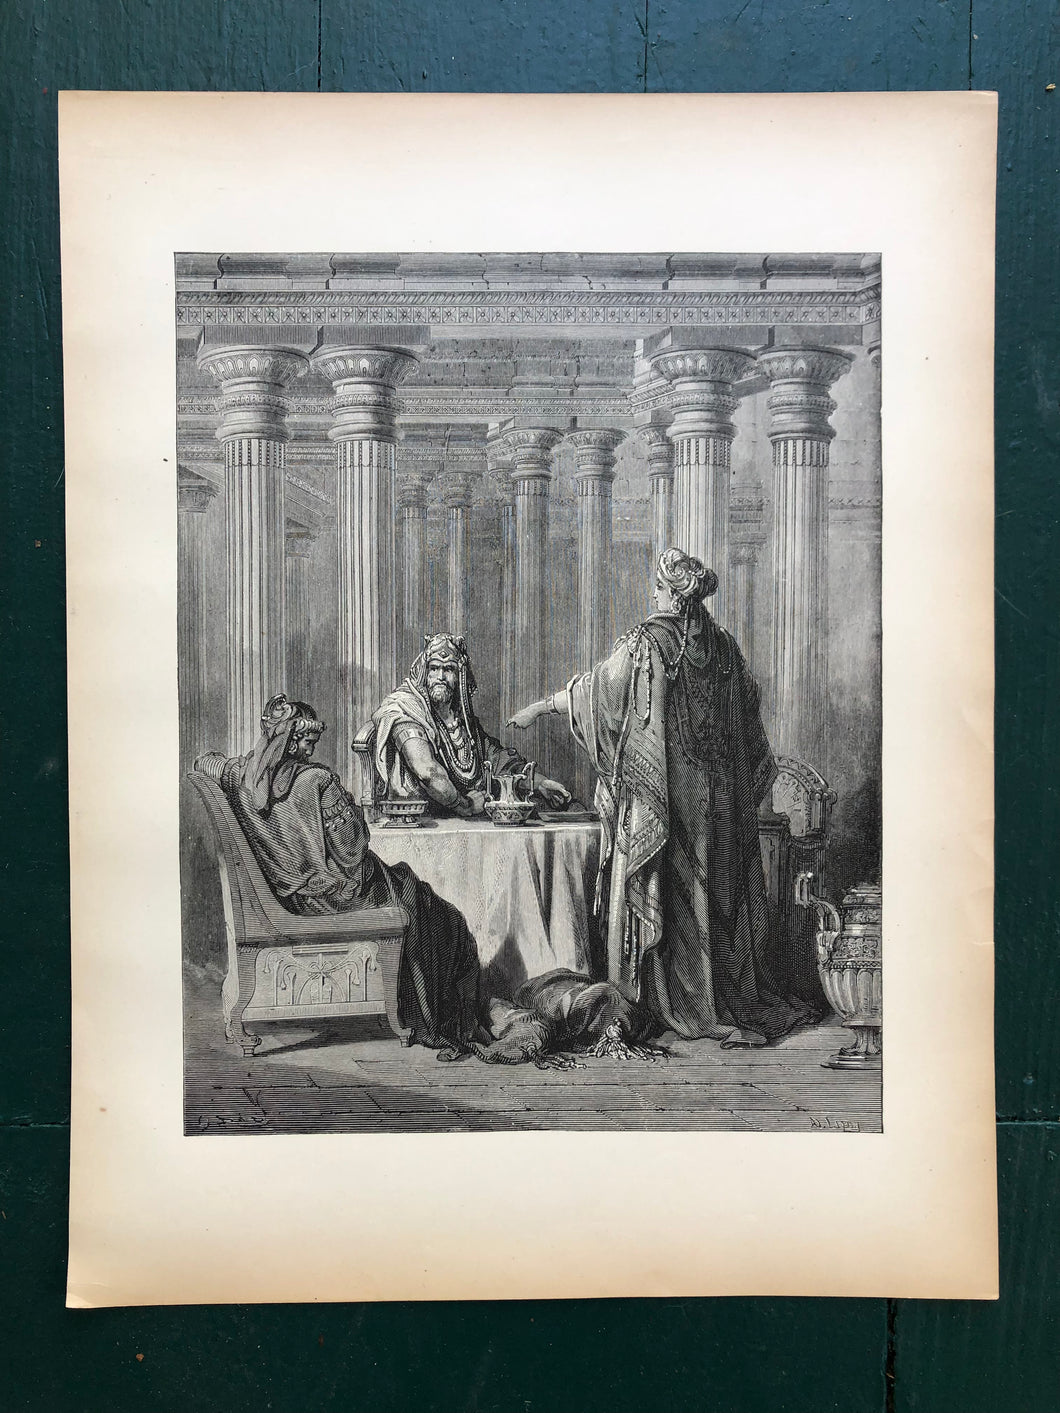 Esther Confounding Haman. Print from The Dore Bible Gallery by Gustave Dore